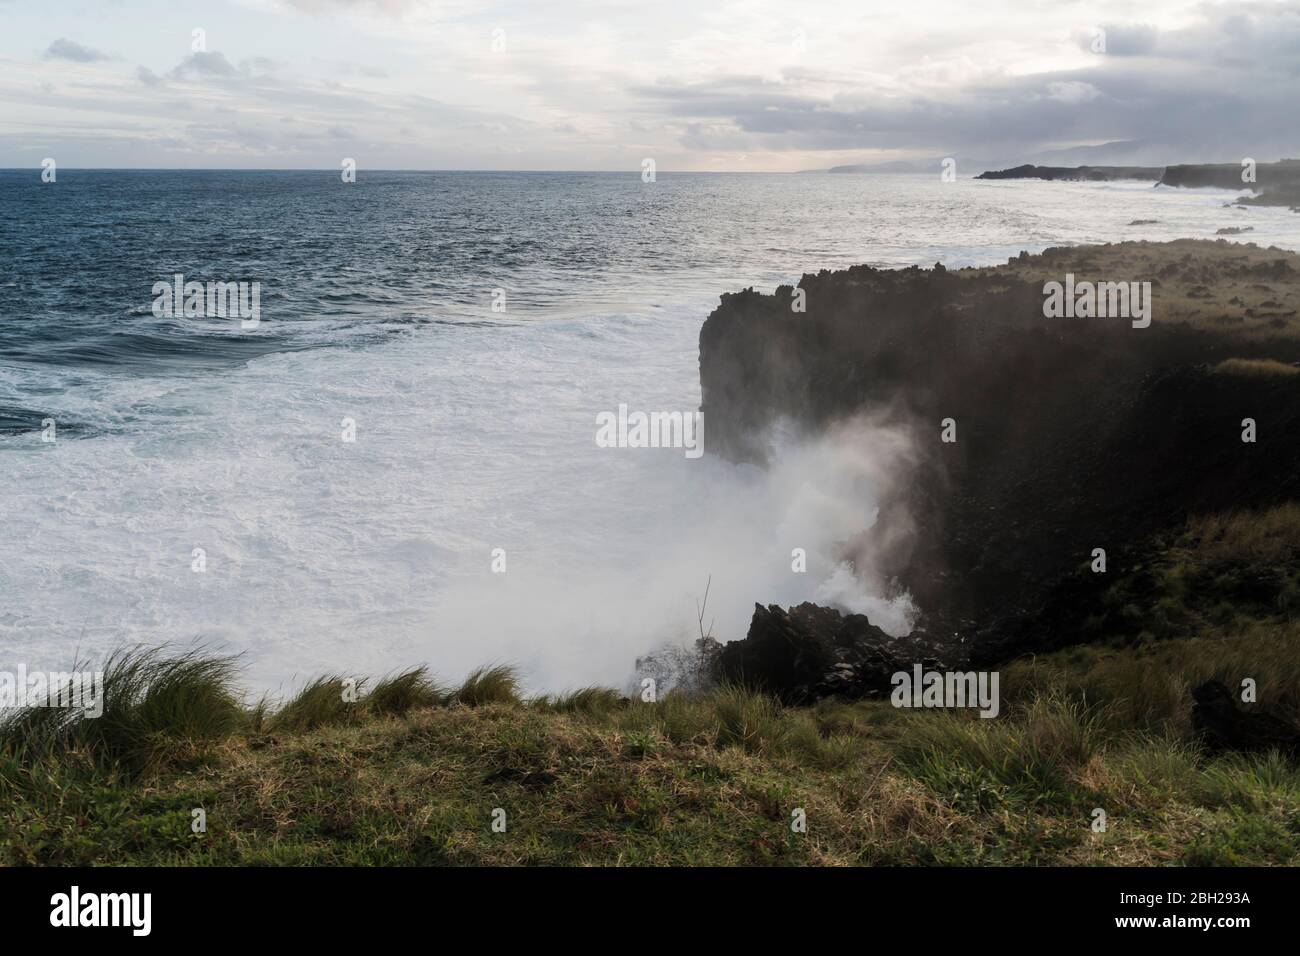 Breaking waves at the coast, Sao Miguel Island, Azores, Portugal Stock Photo